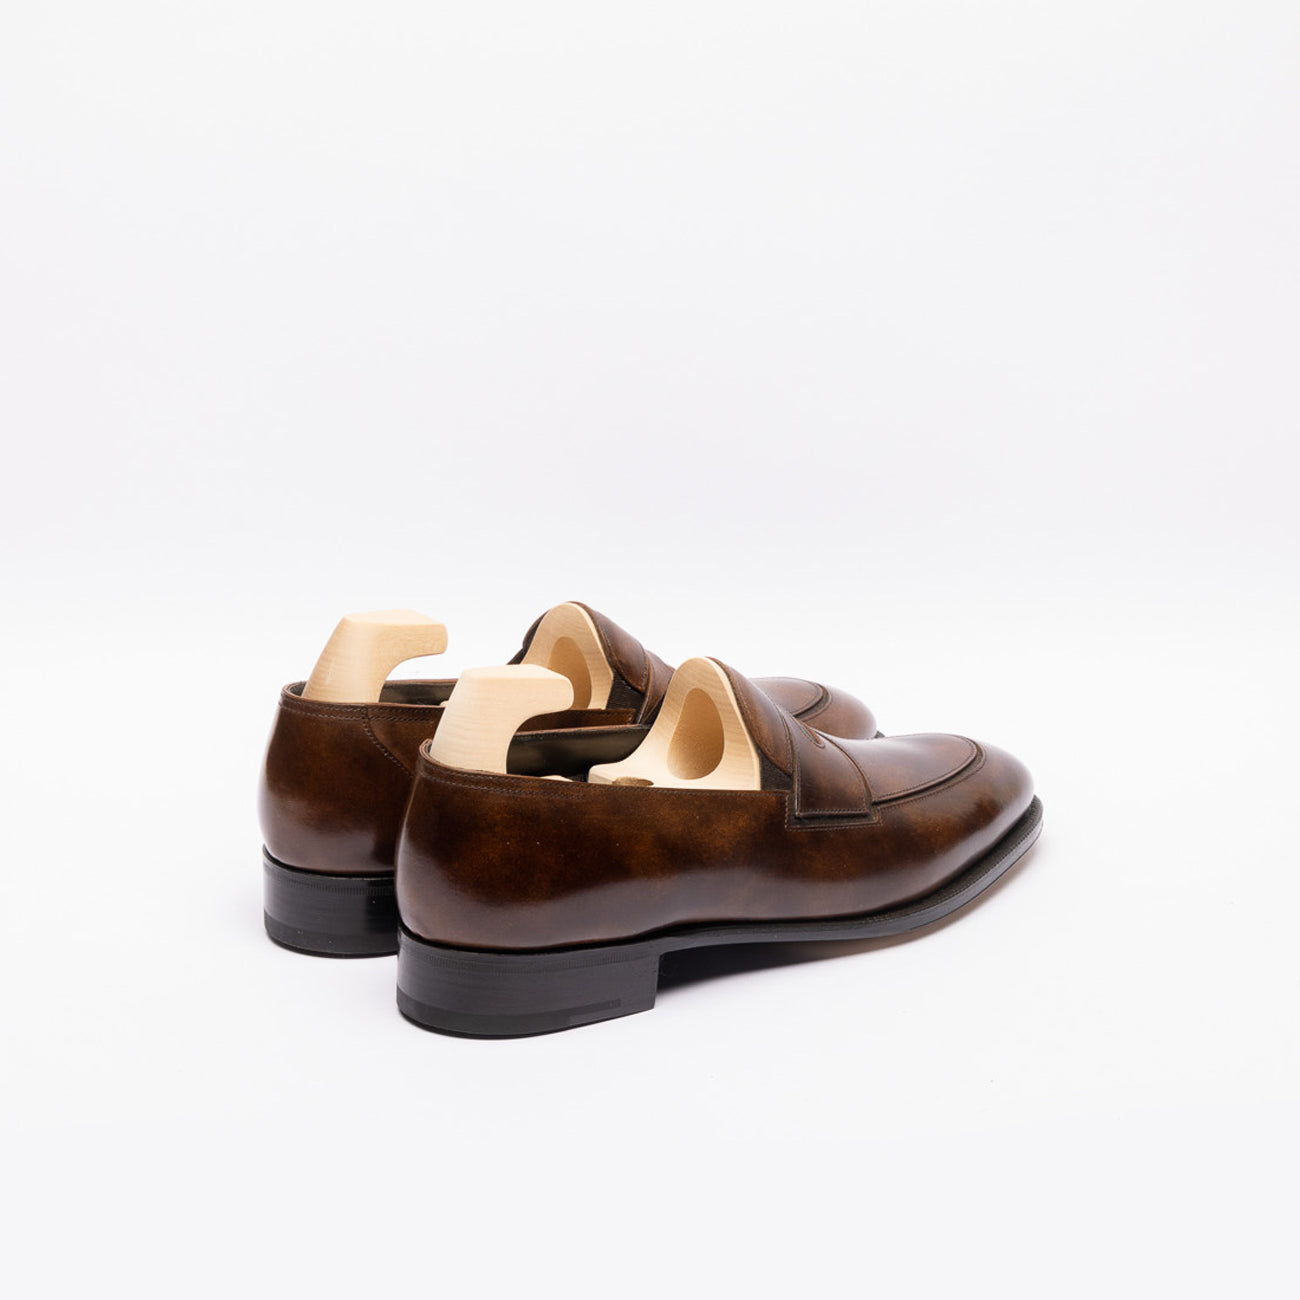 John Lobb Montgomery penny loafer in brown leather